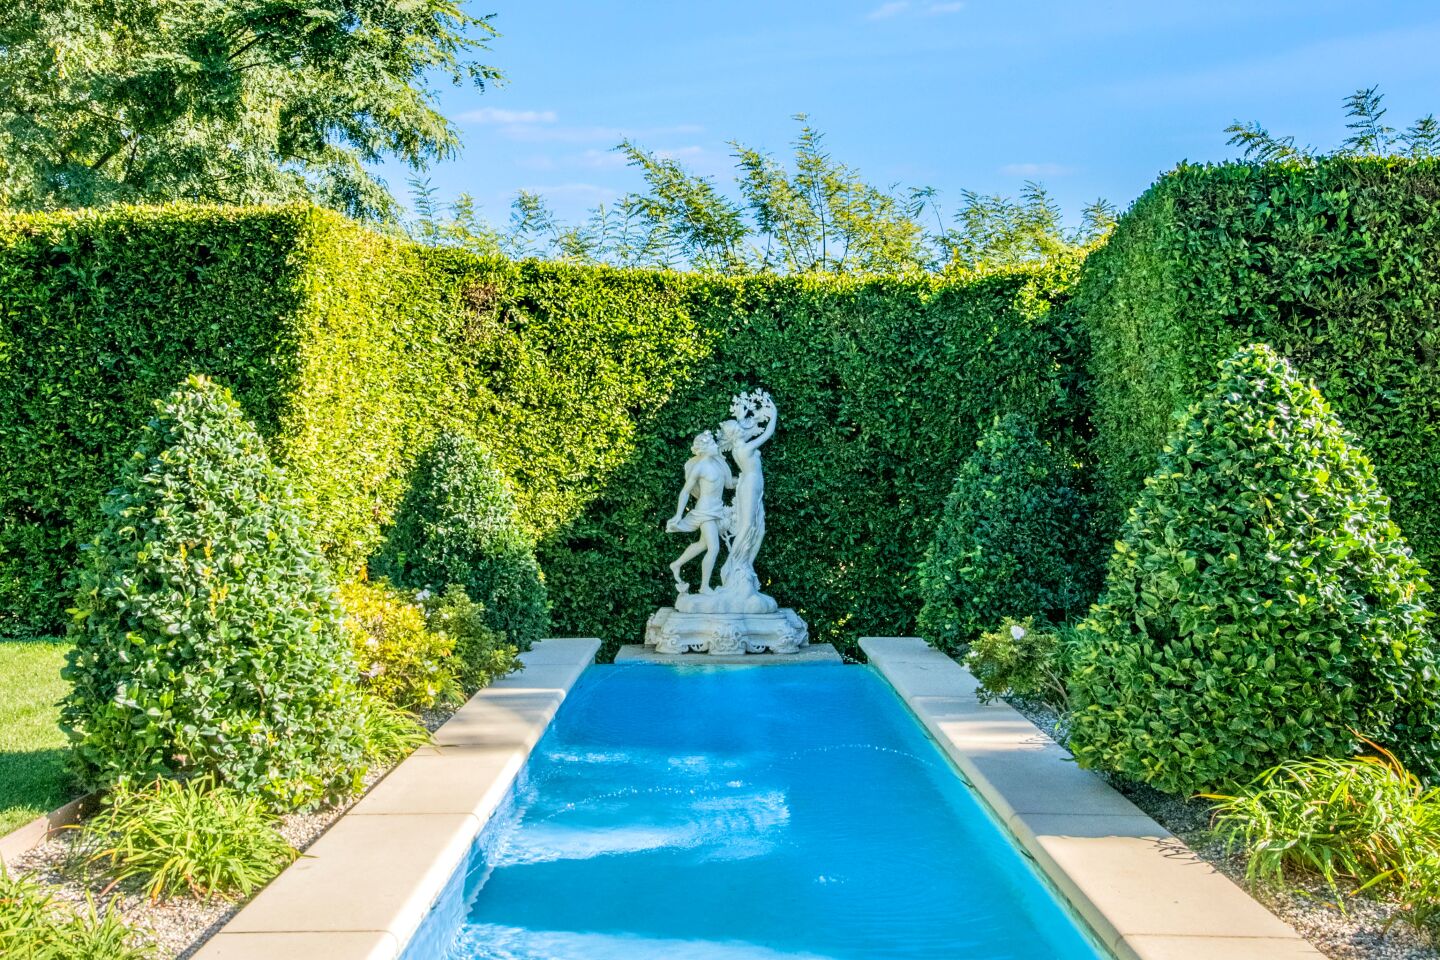 The long rectangular reflecting pool has a statue at one end and tall hedges.